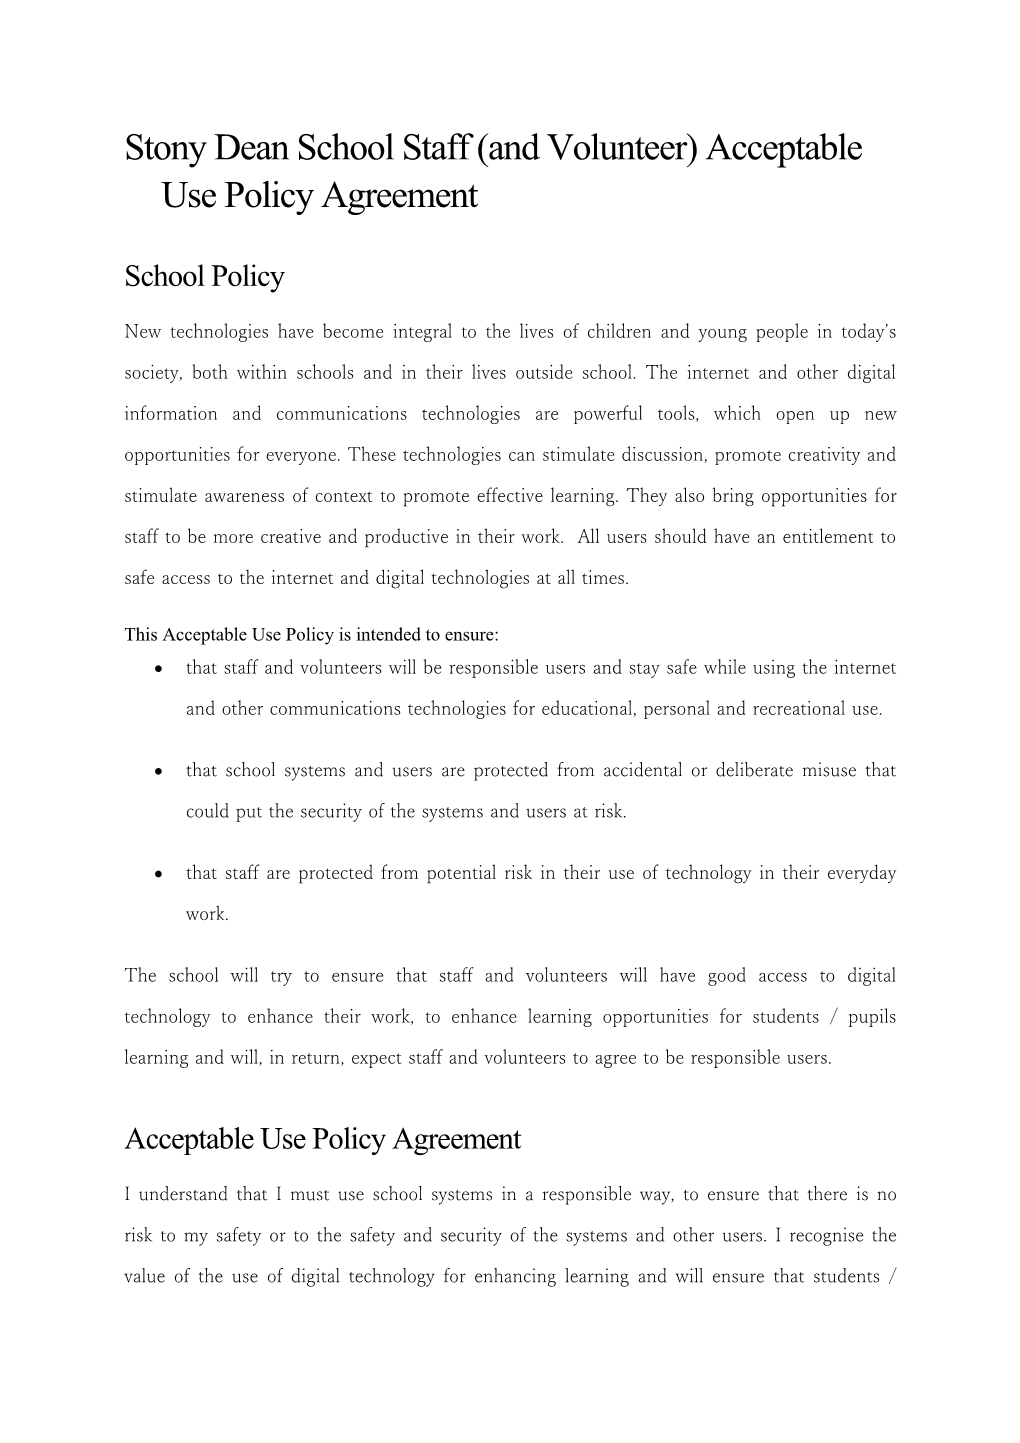 Stony Dean School Staff (And Volunteer) Acceptable Use Policy Agreement